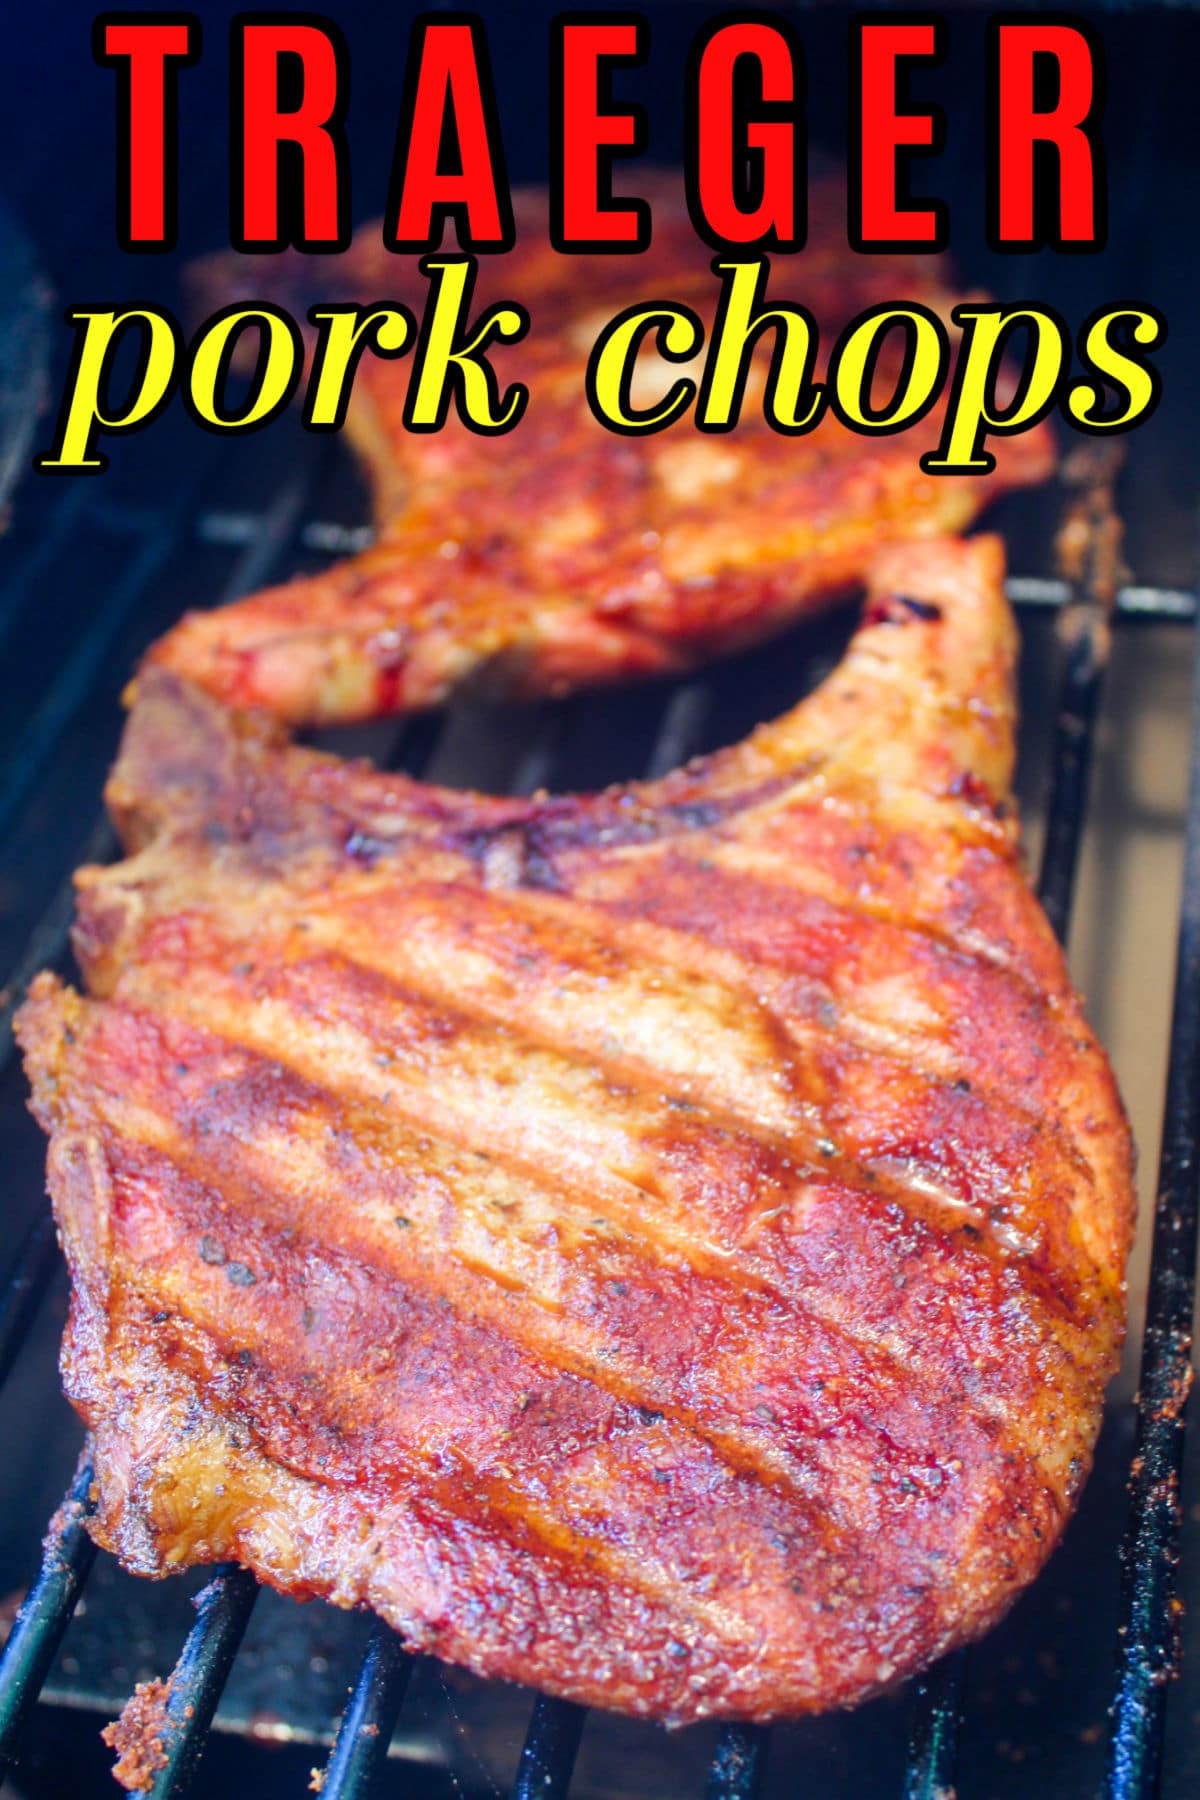 Cooking pork chops on your Traeger is the WAY to go! It's juicy and smoky - just a plate of delicious right there!
 via @foodhussy